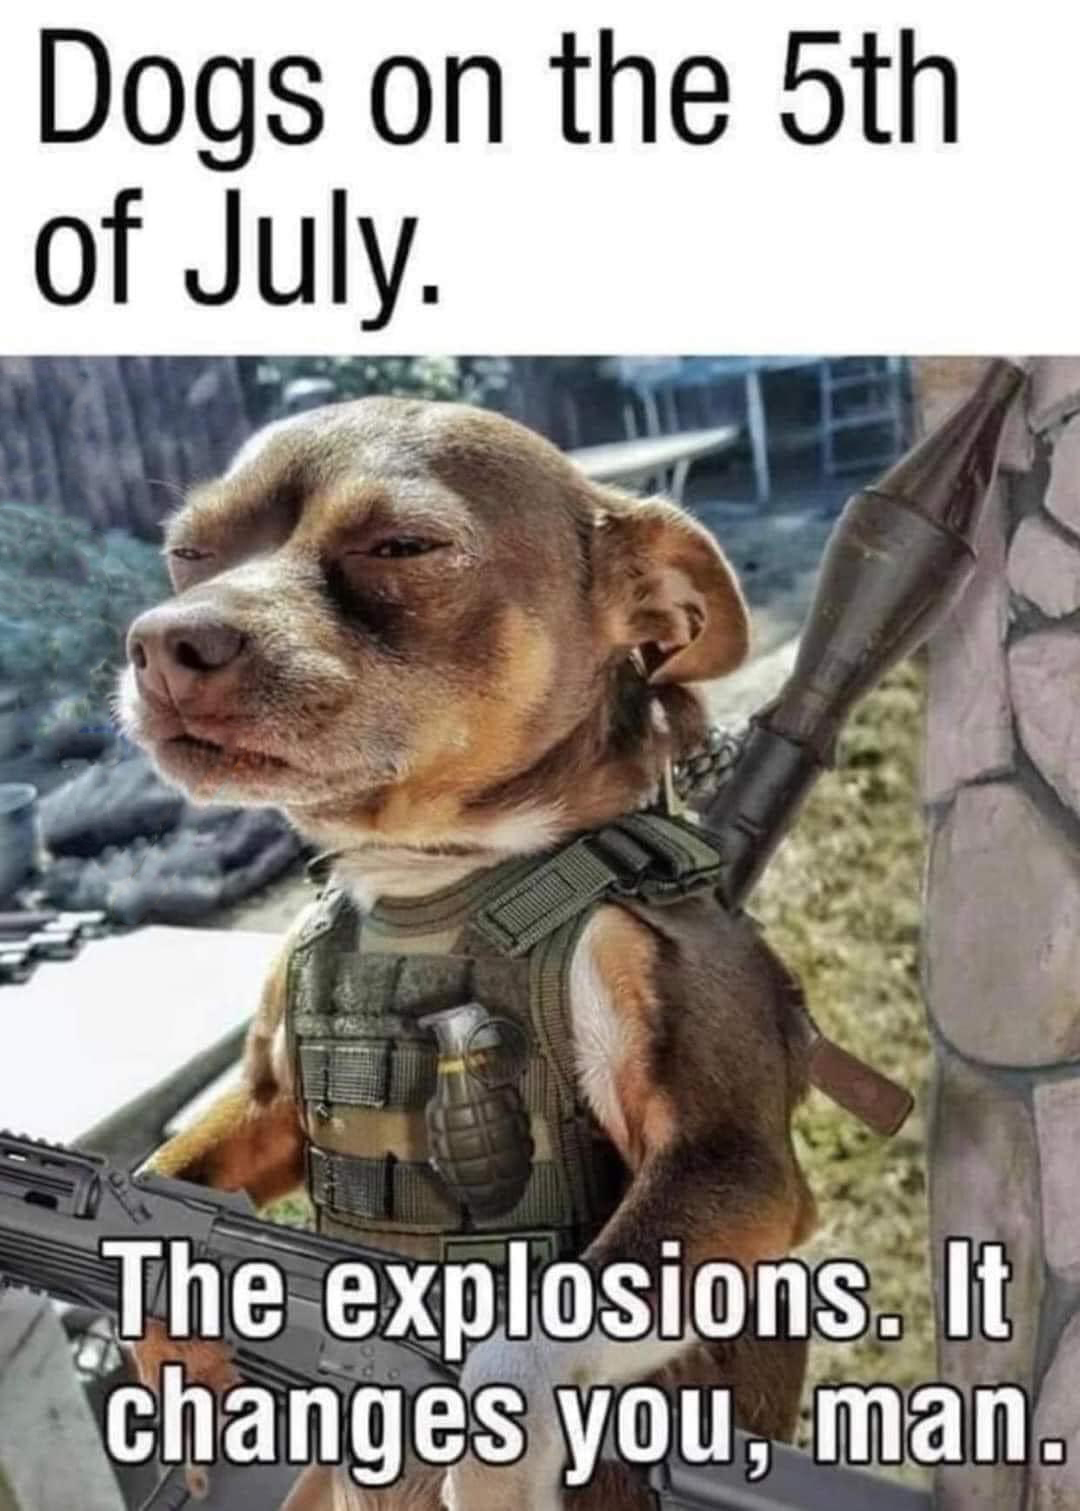 dank memes - dogs on the 5th of july - Dogs on the 5th of July. The explosions. It changes you, man